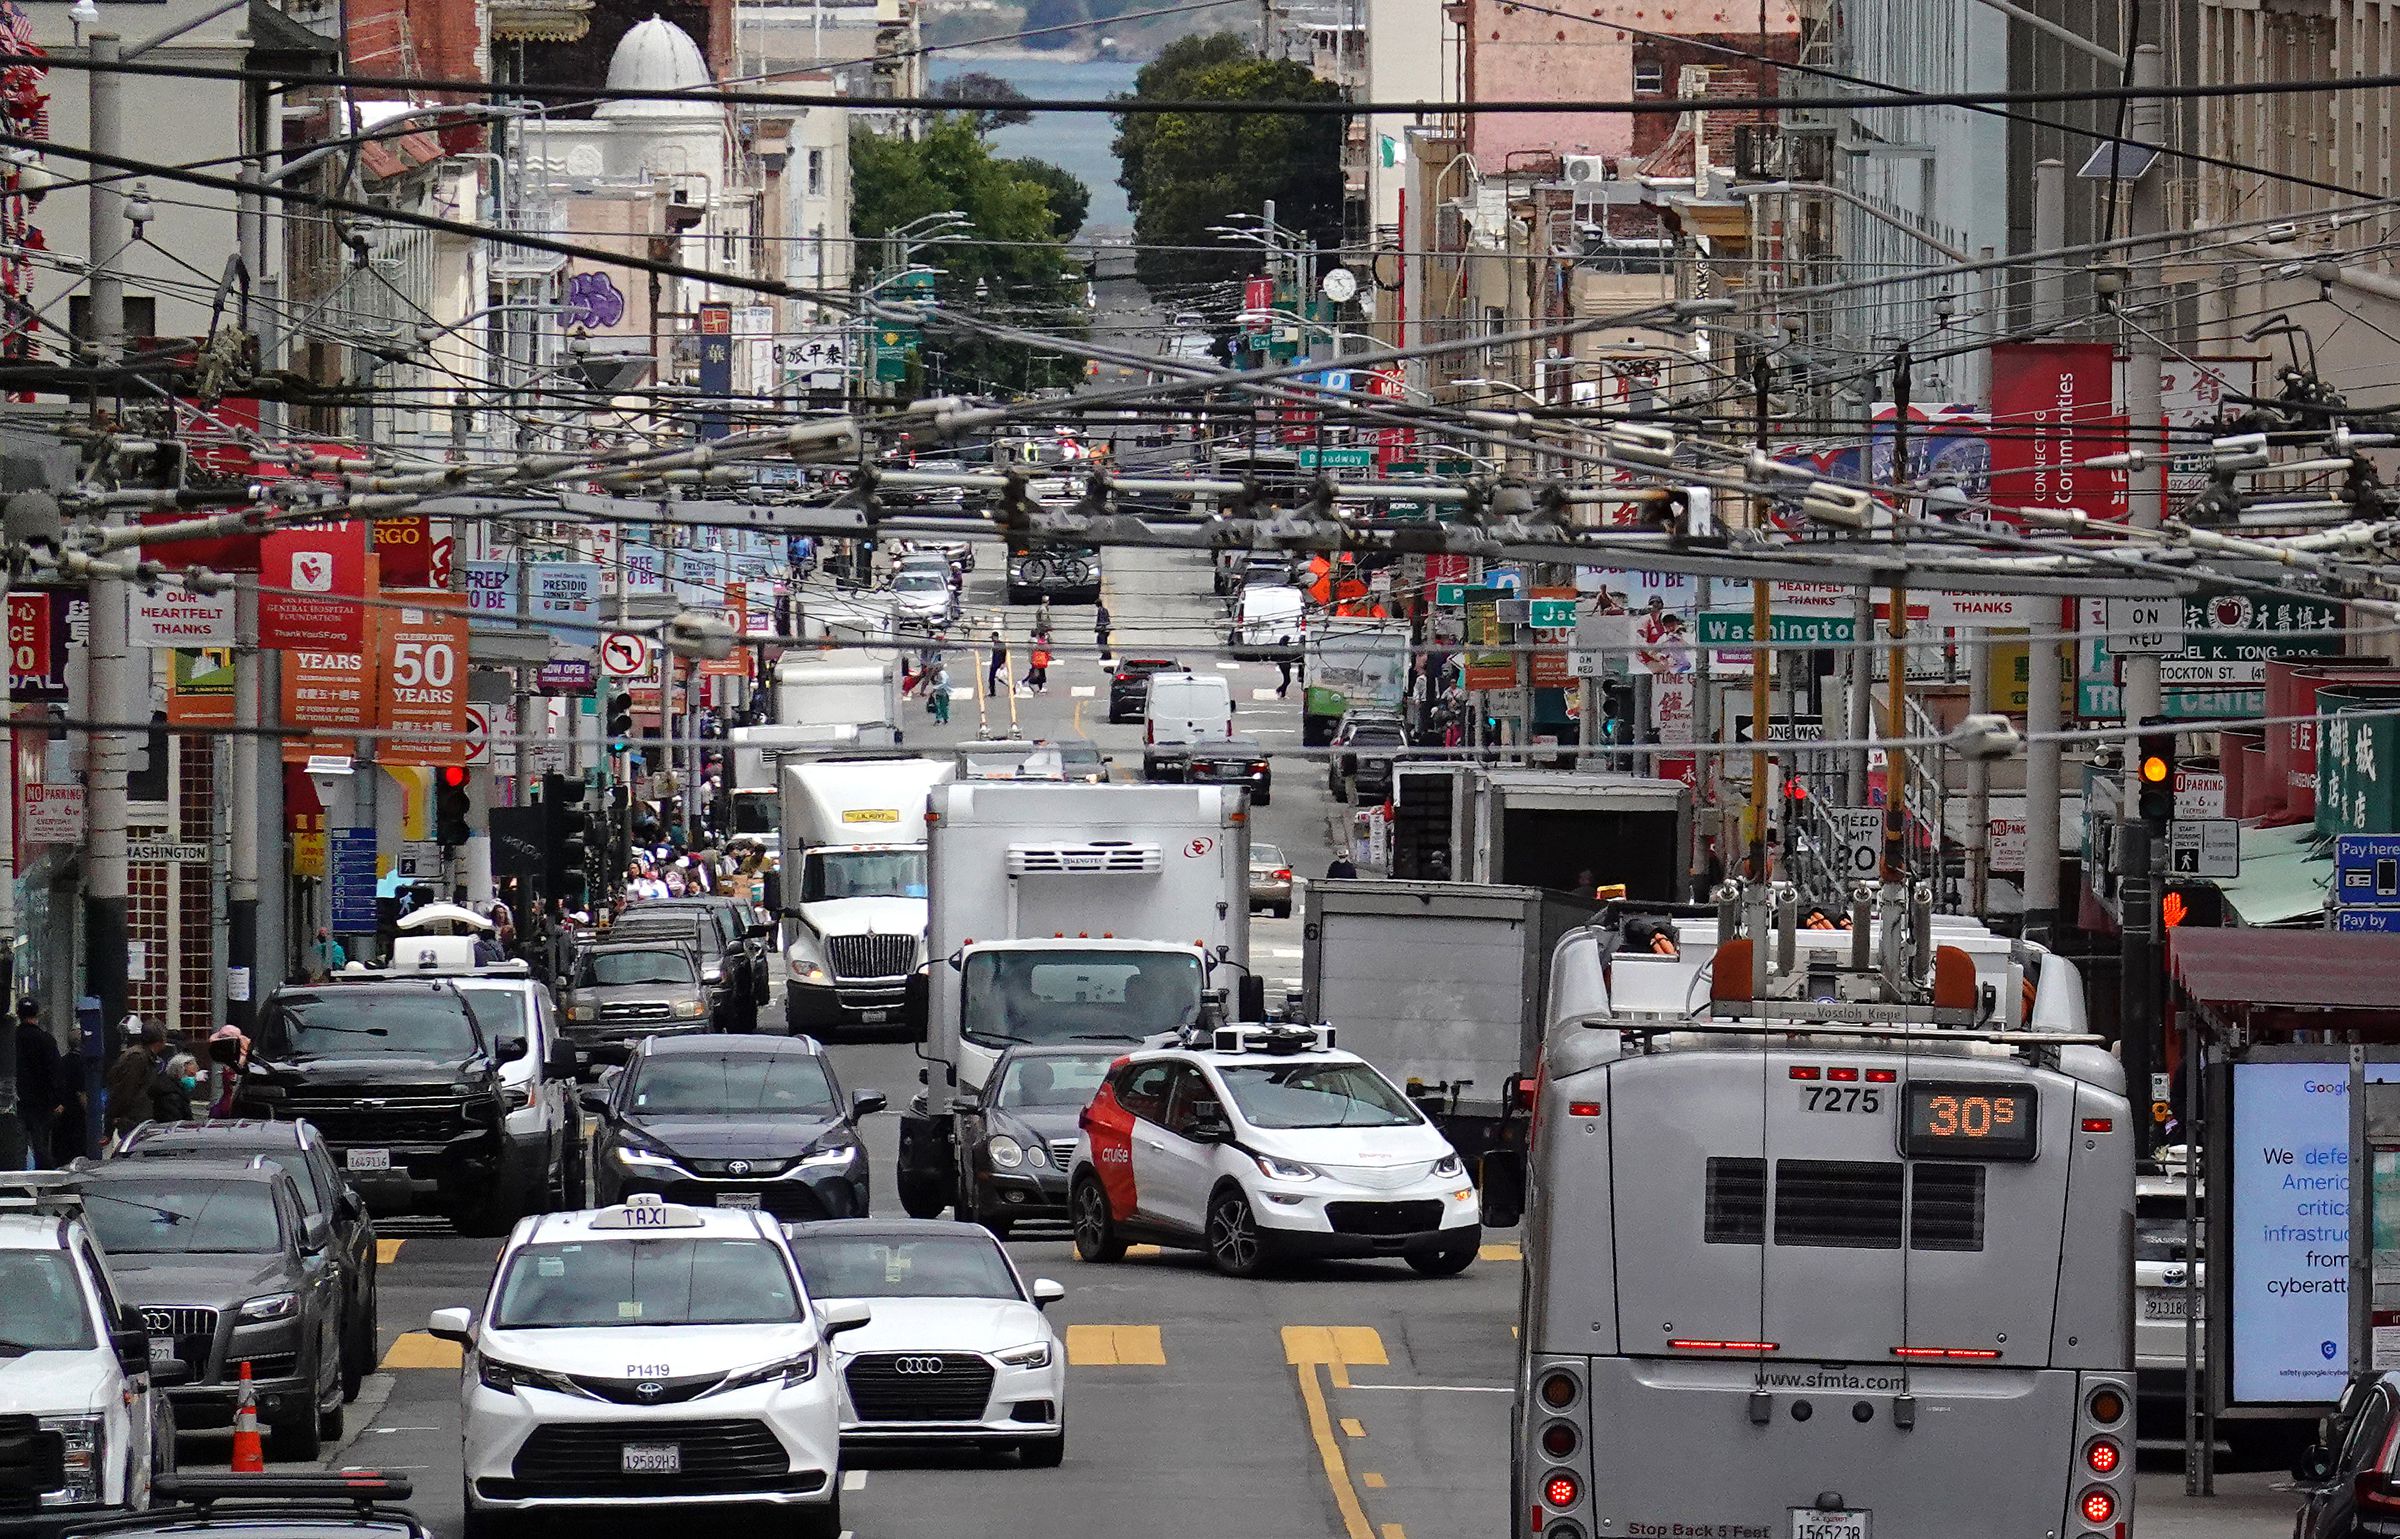 Self-Driving Cars, Now Common In San Francisco, Bring Backlash From Residents